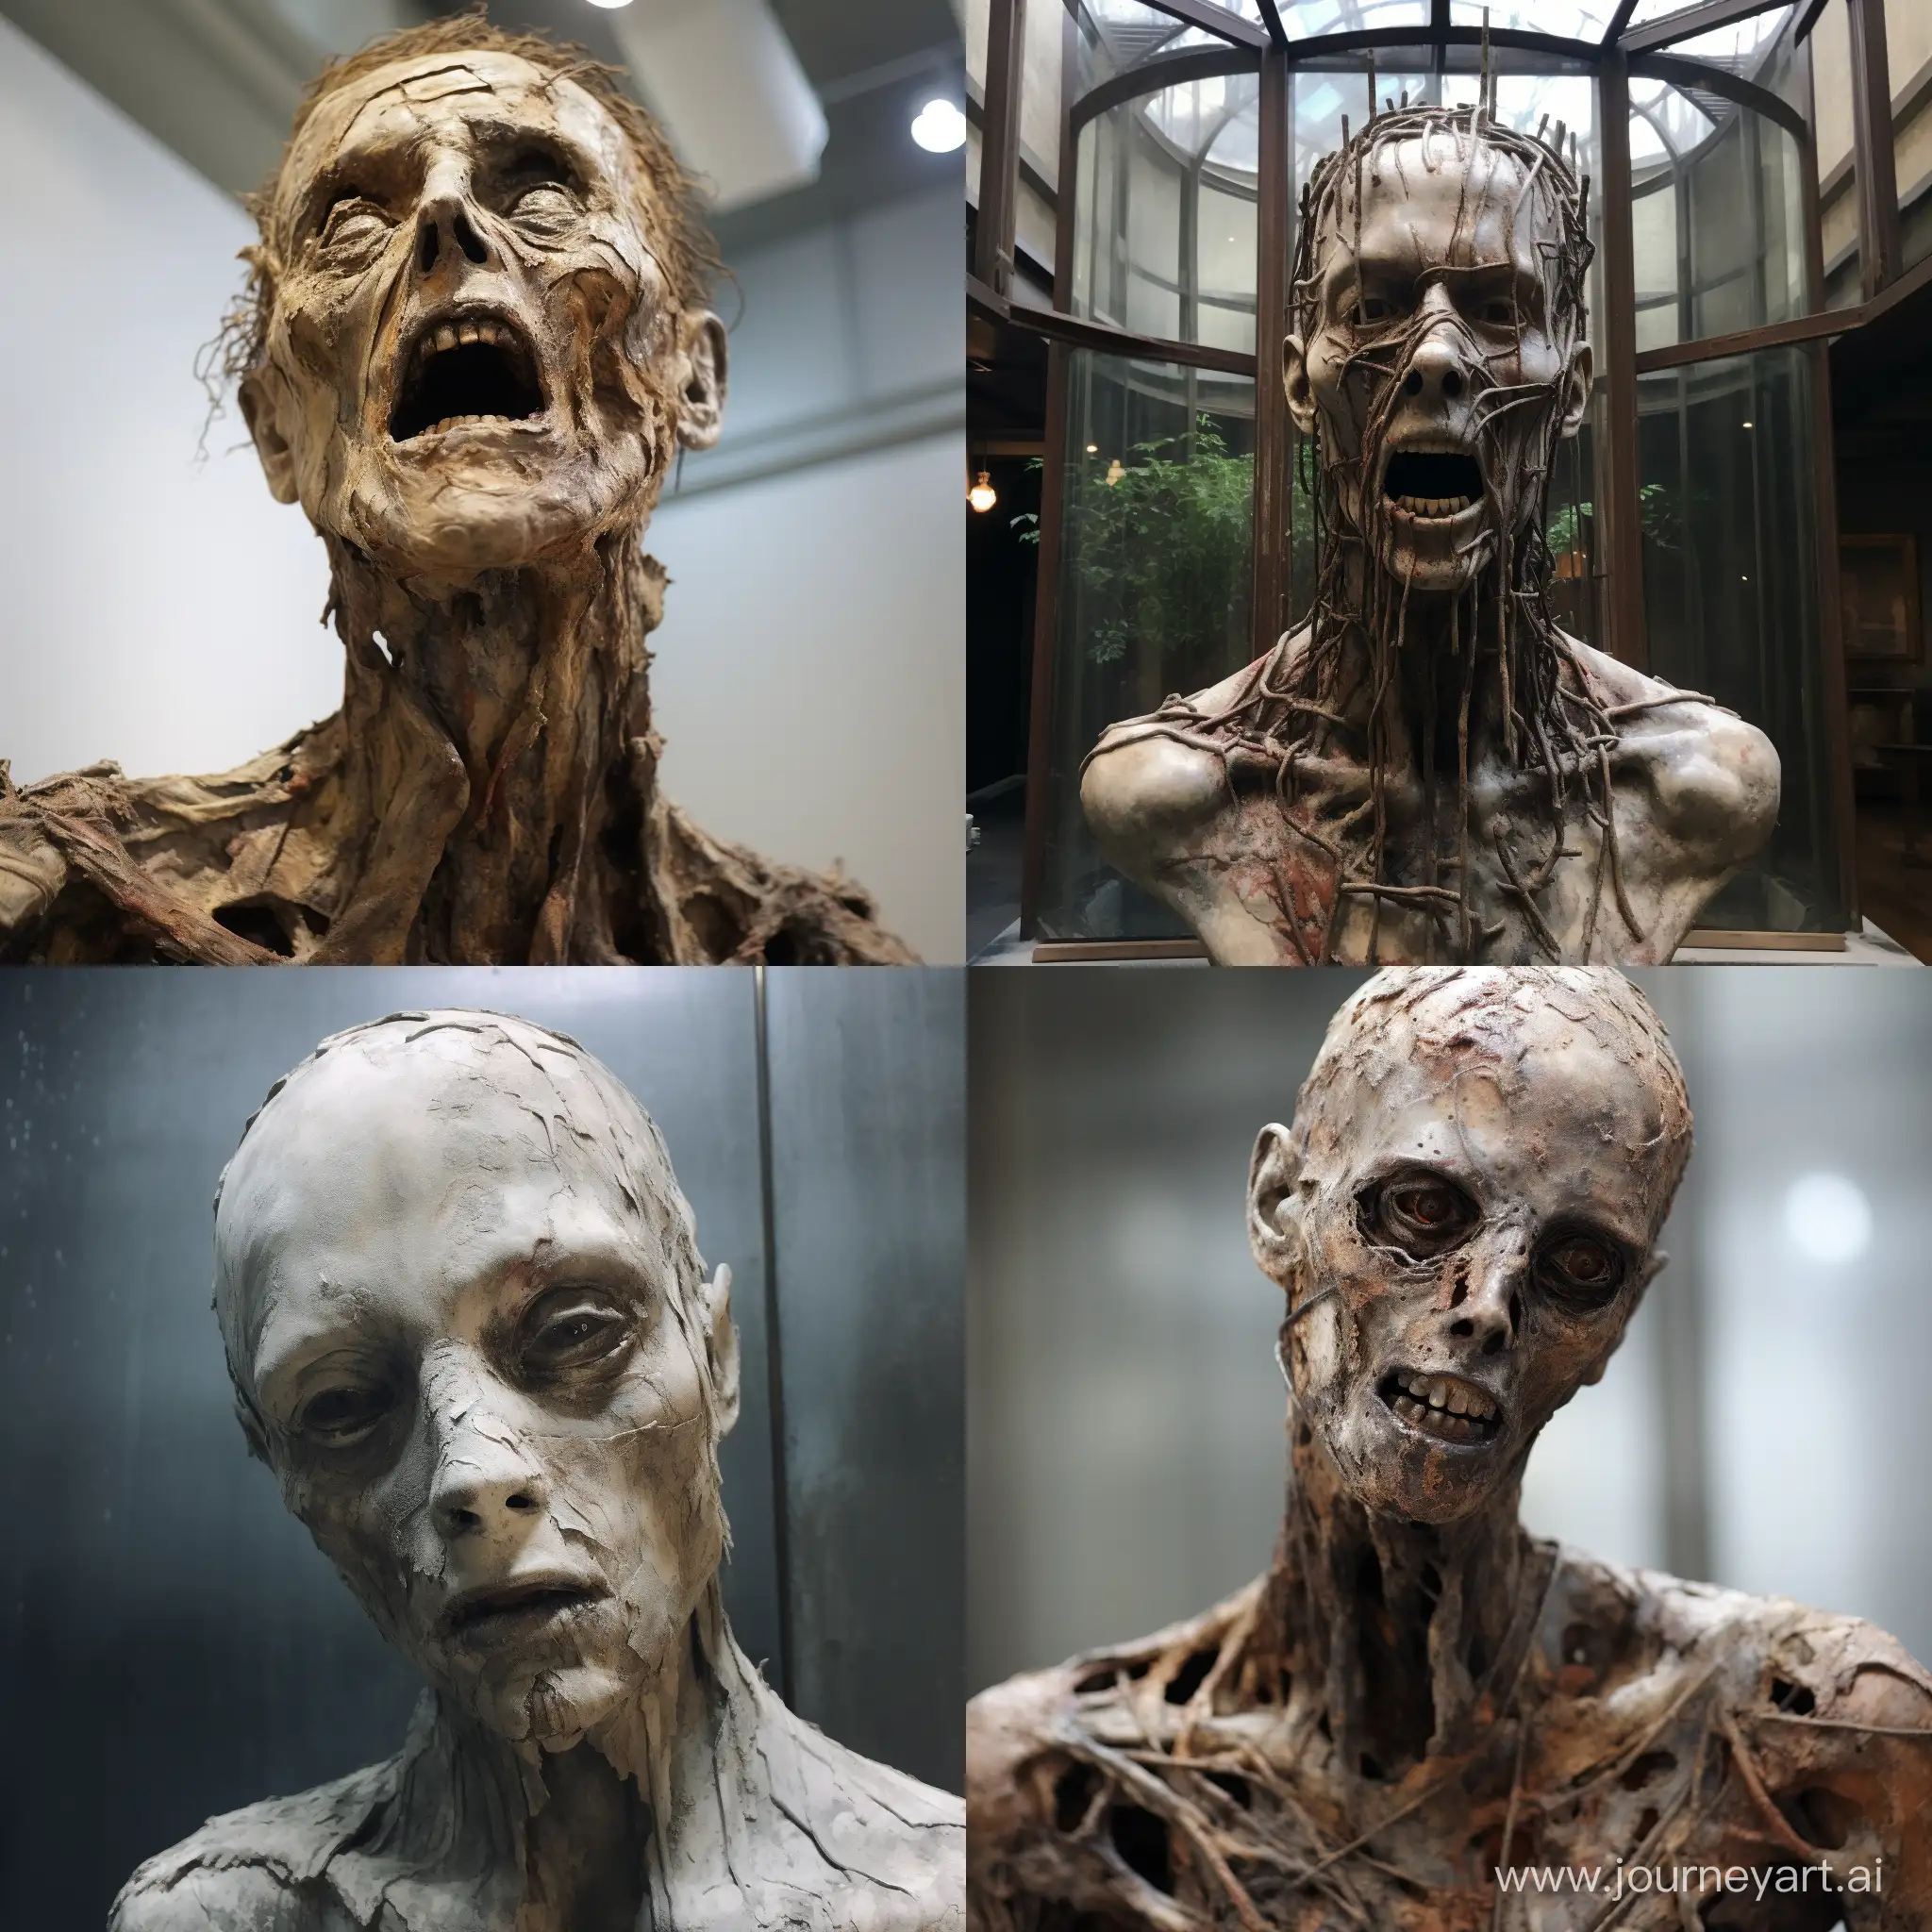 This statue of a human whose face was destroyed is very scary